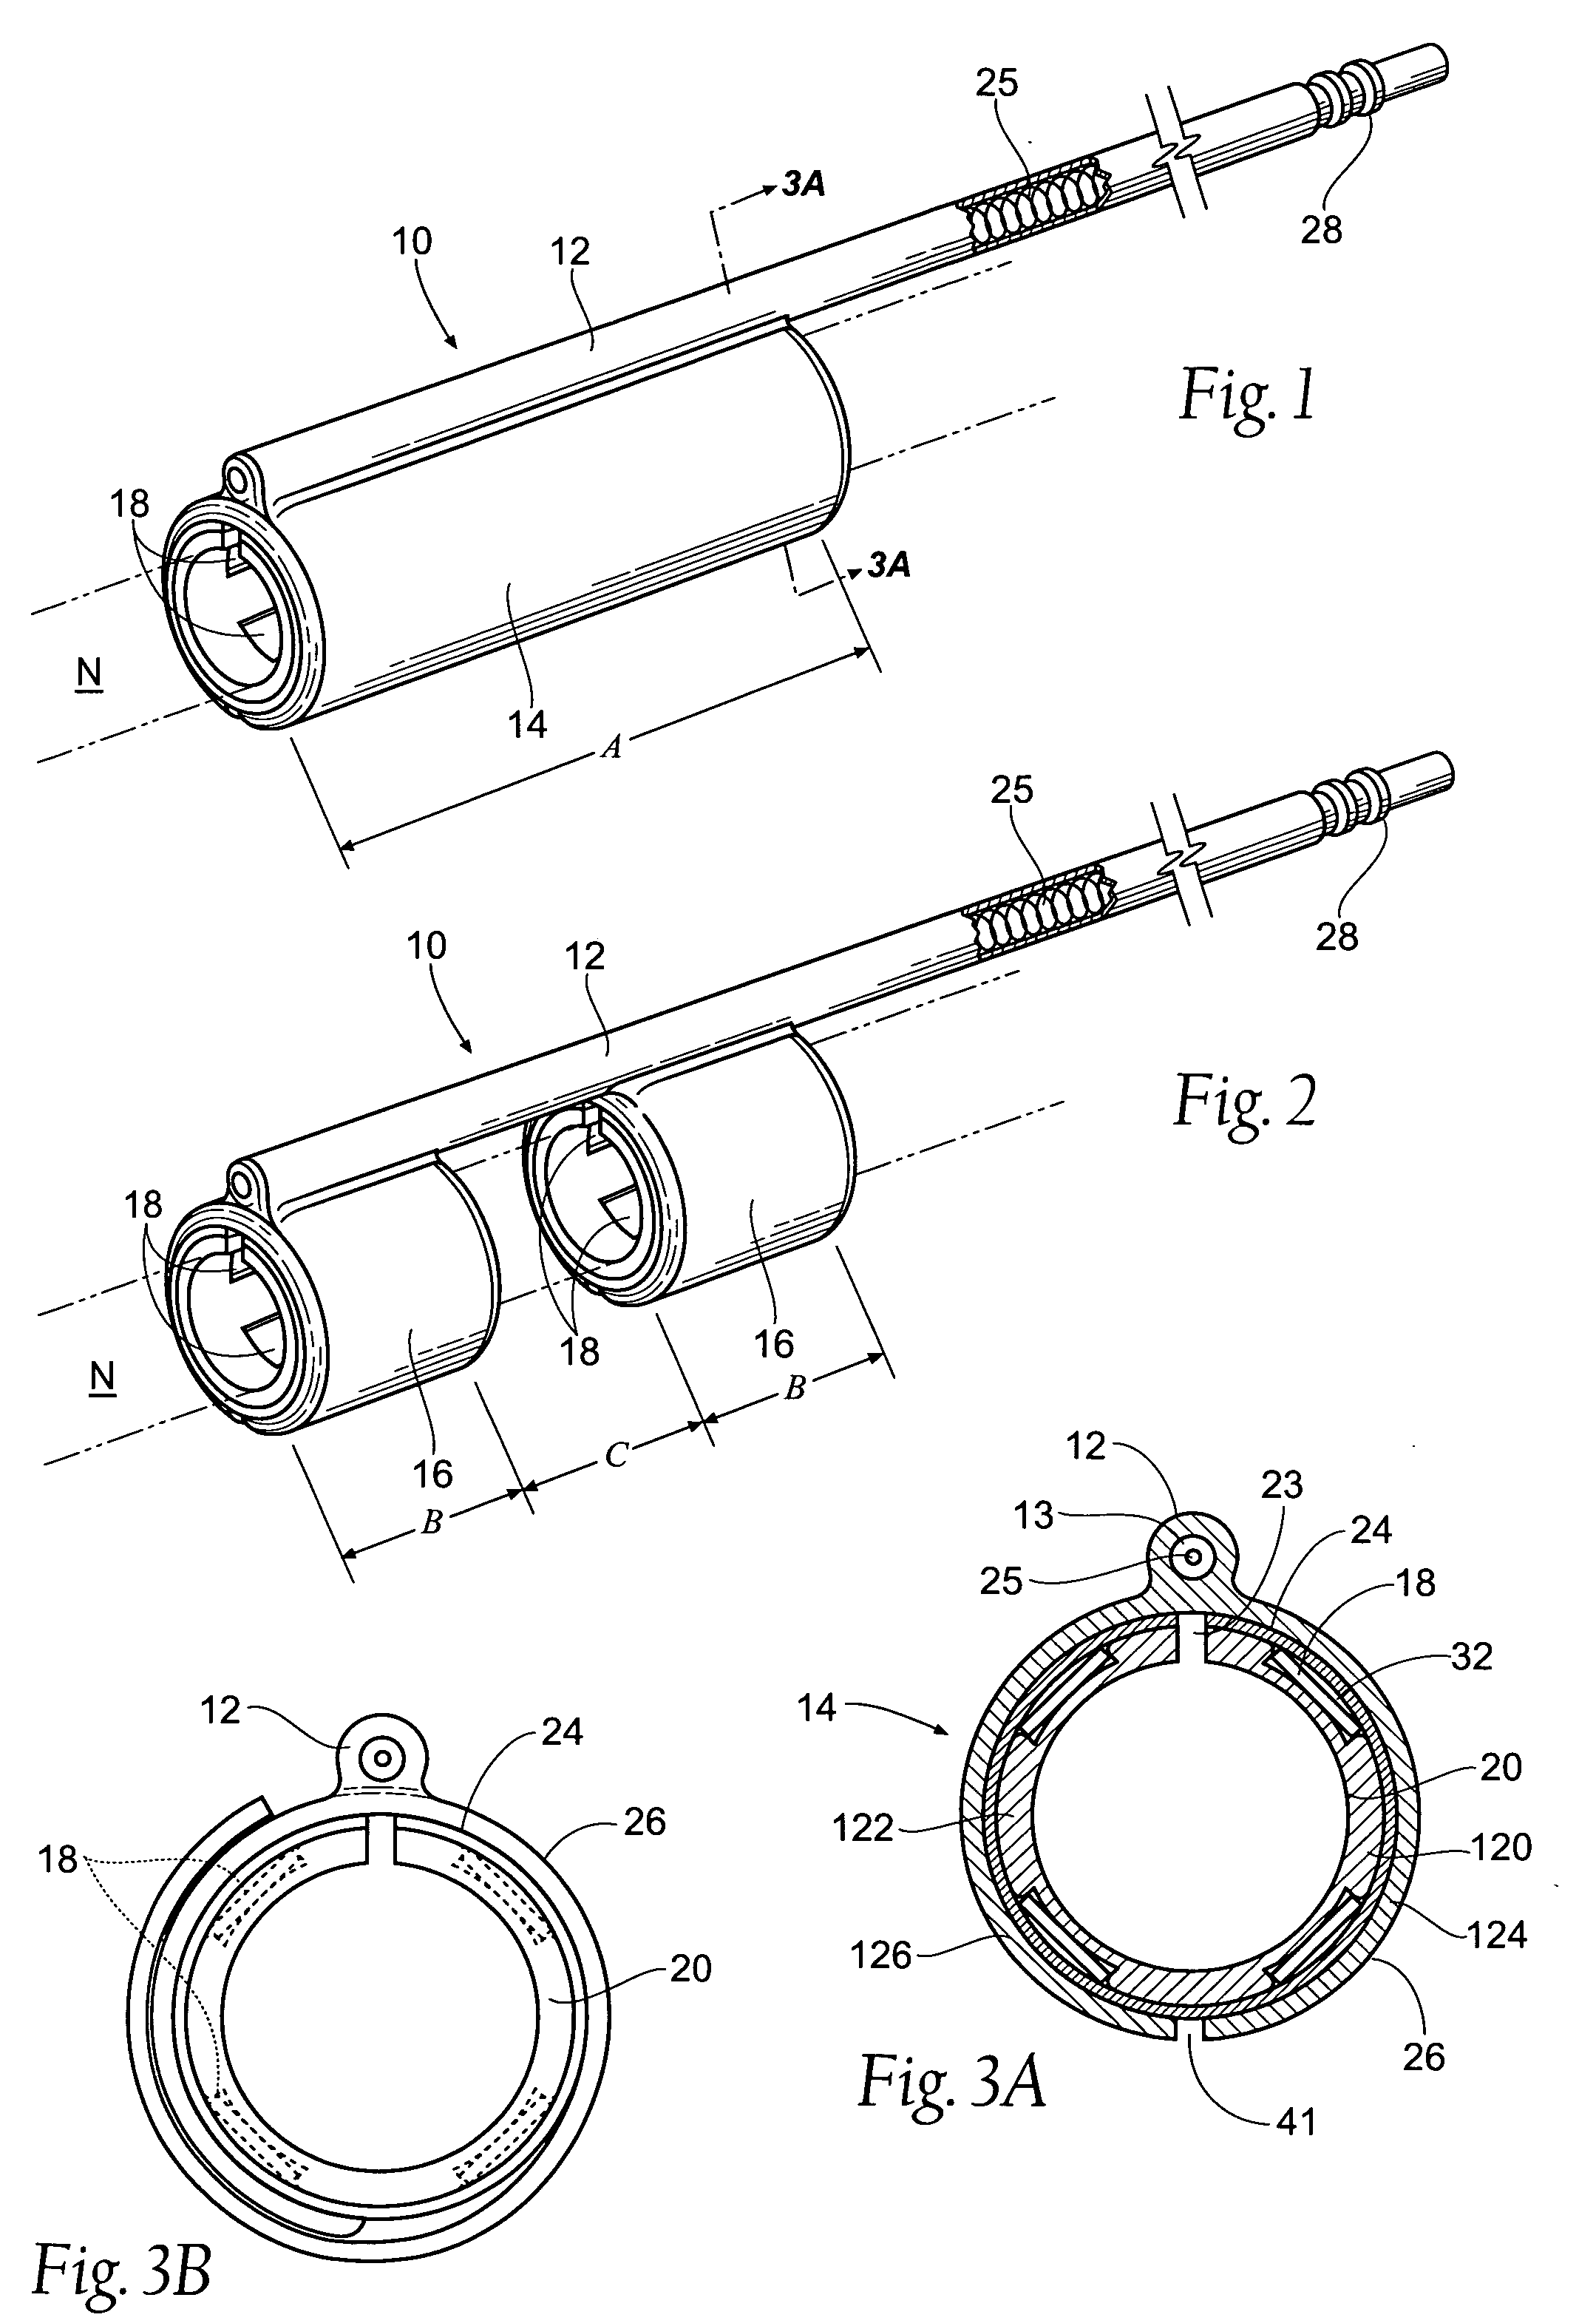 Devices, systems, and methods employing a molded nerve cuff electrode